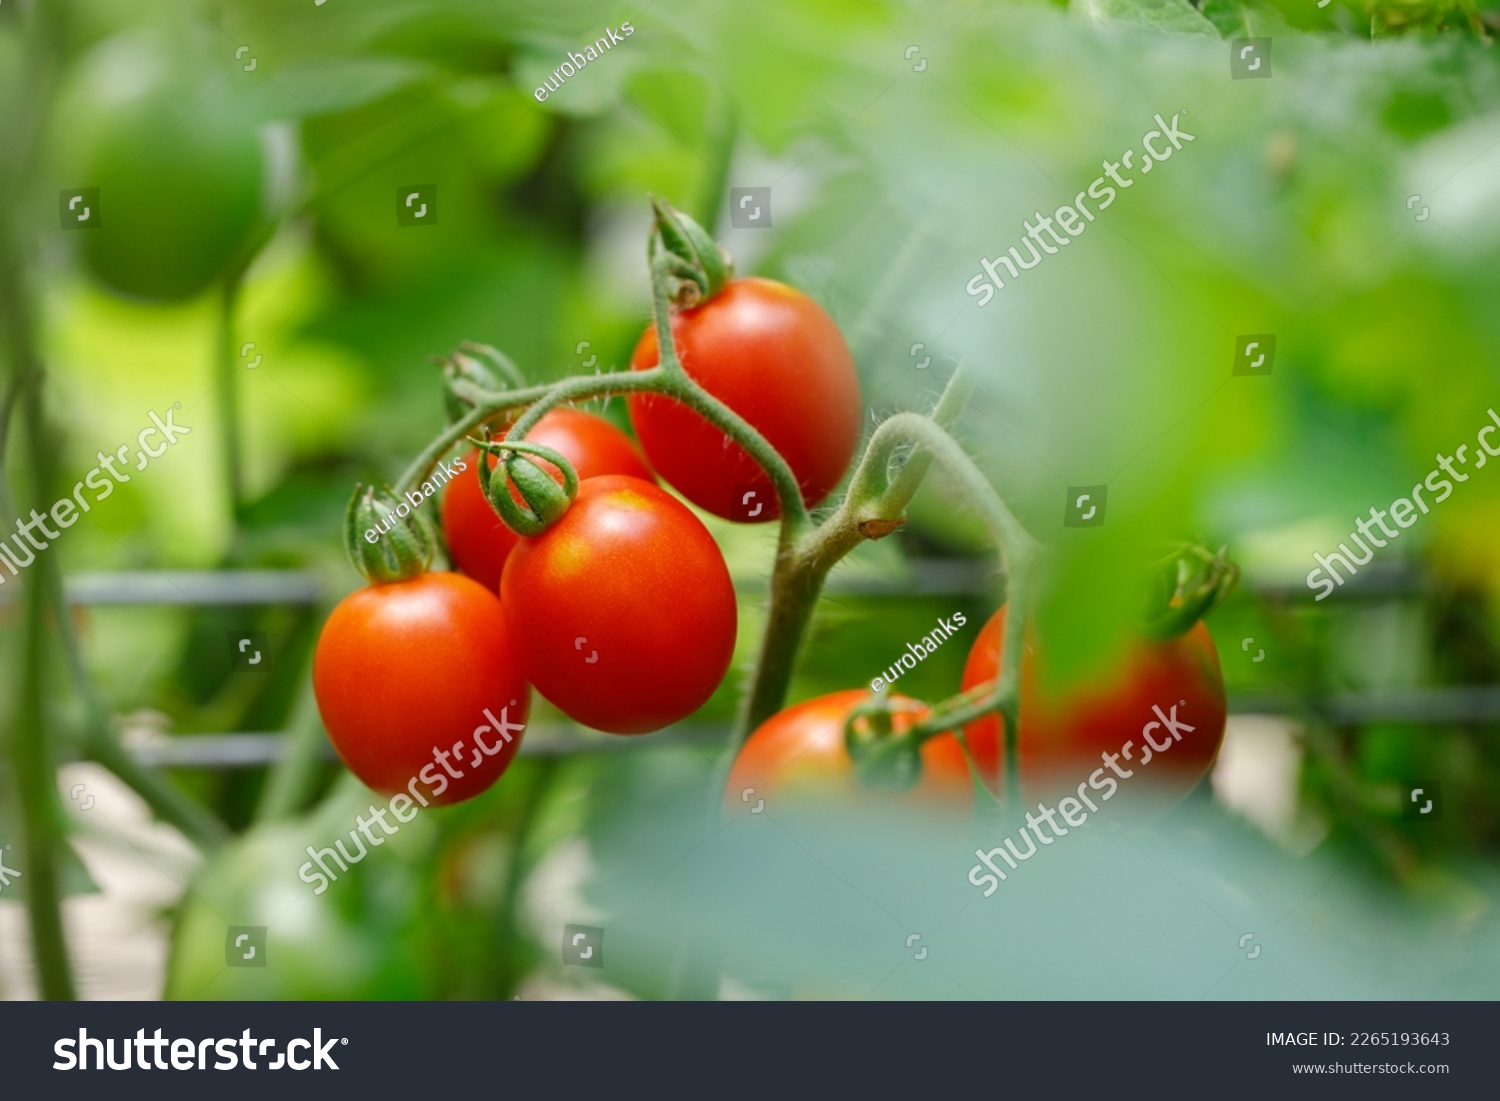 Grape Tomatoes - 'Principe Borghese' variety - growing on the vine in an organic home garden #2265193643